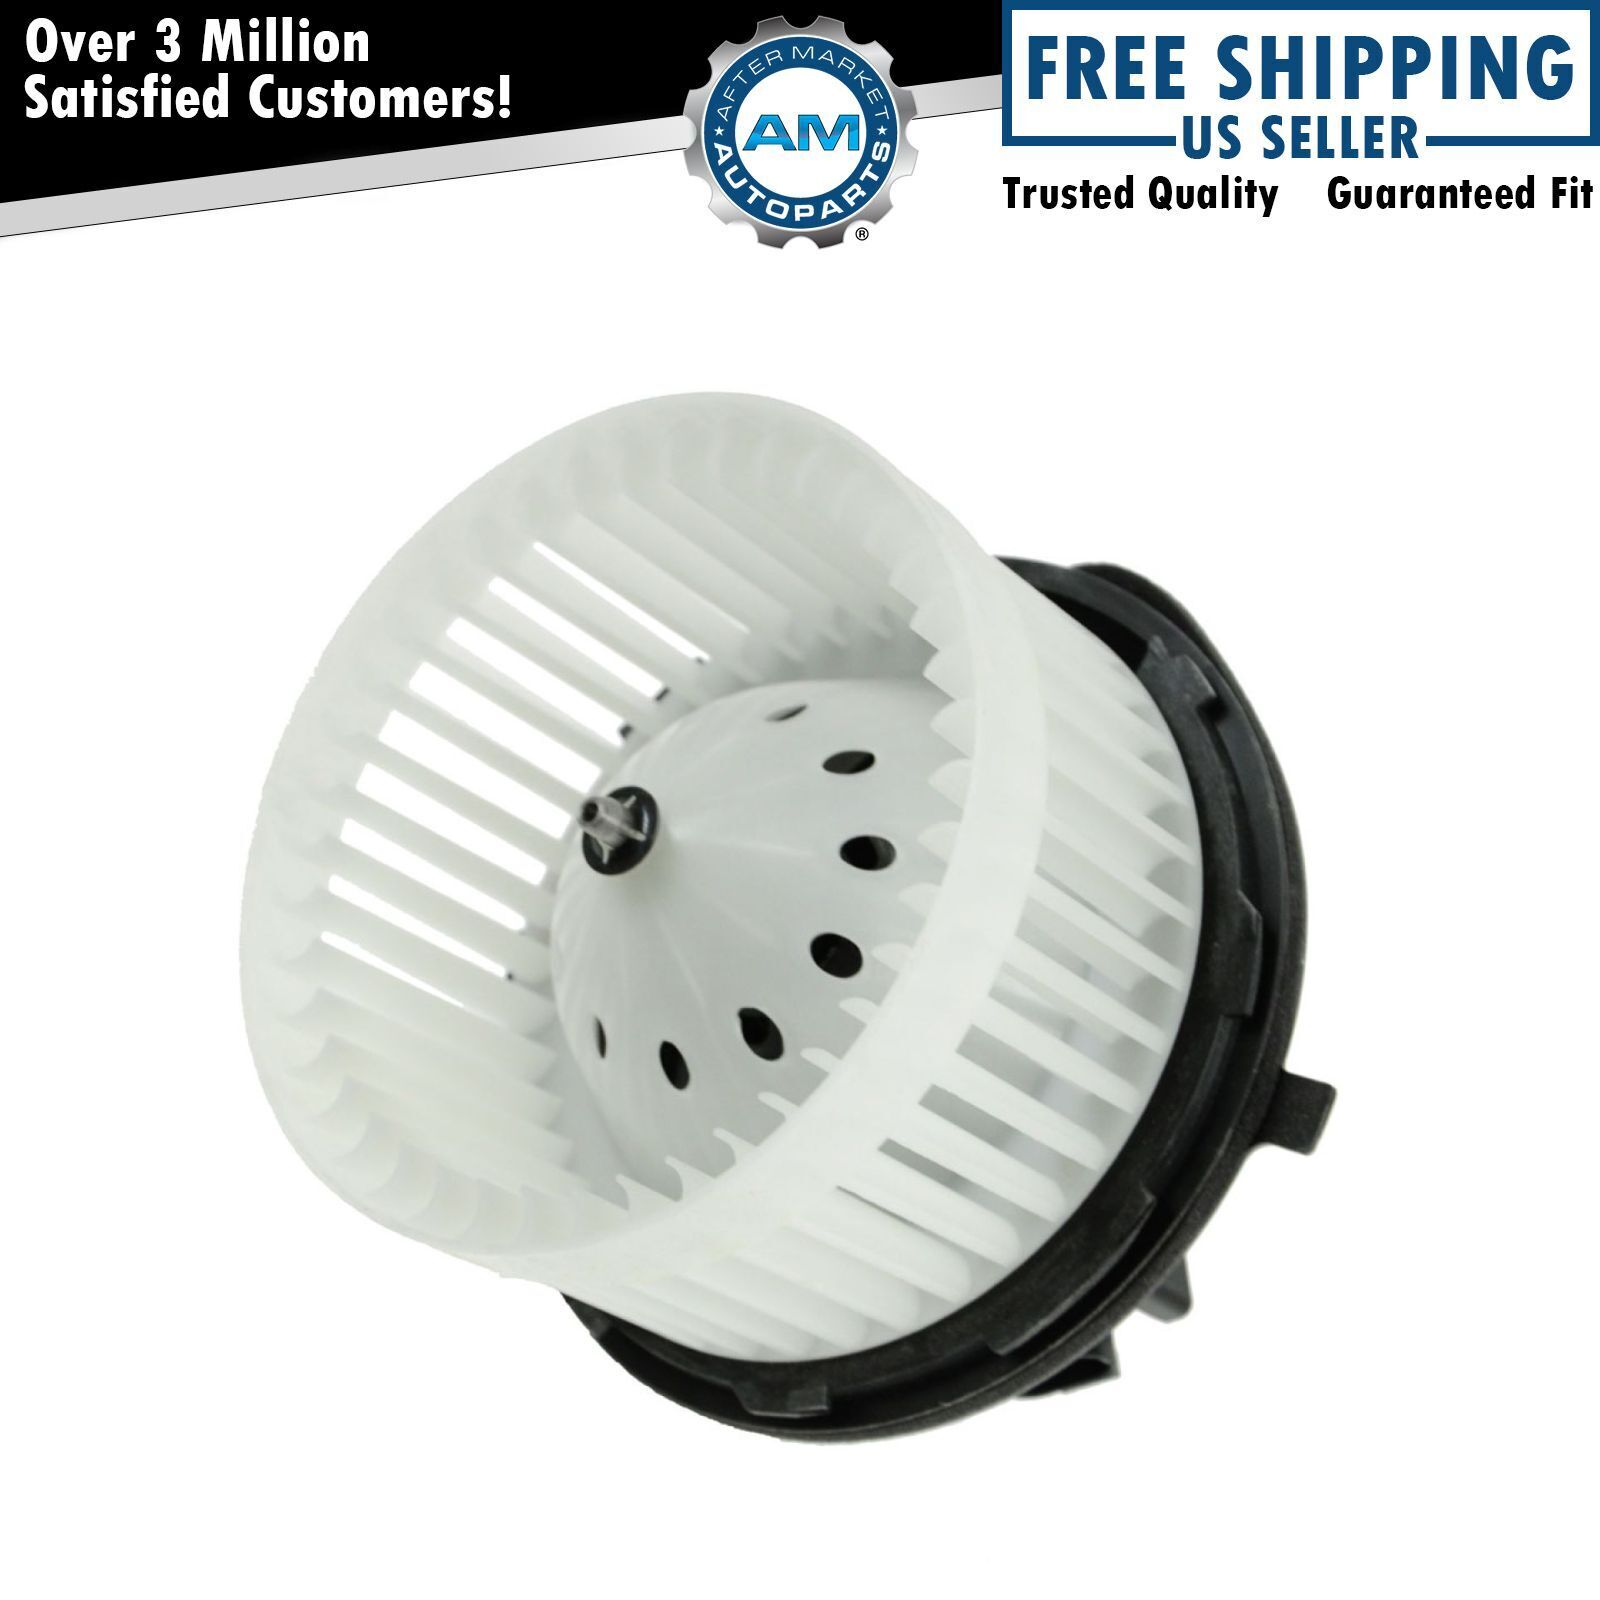 A/C AC Heater Blower Motor w/ Fan Cage for Chevy Cadillac GMC Yukon Pickup Truck